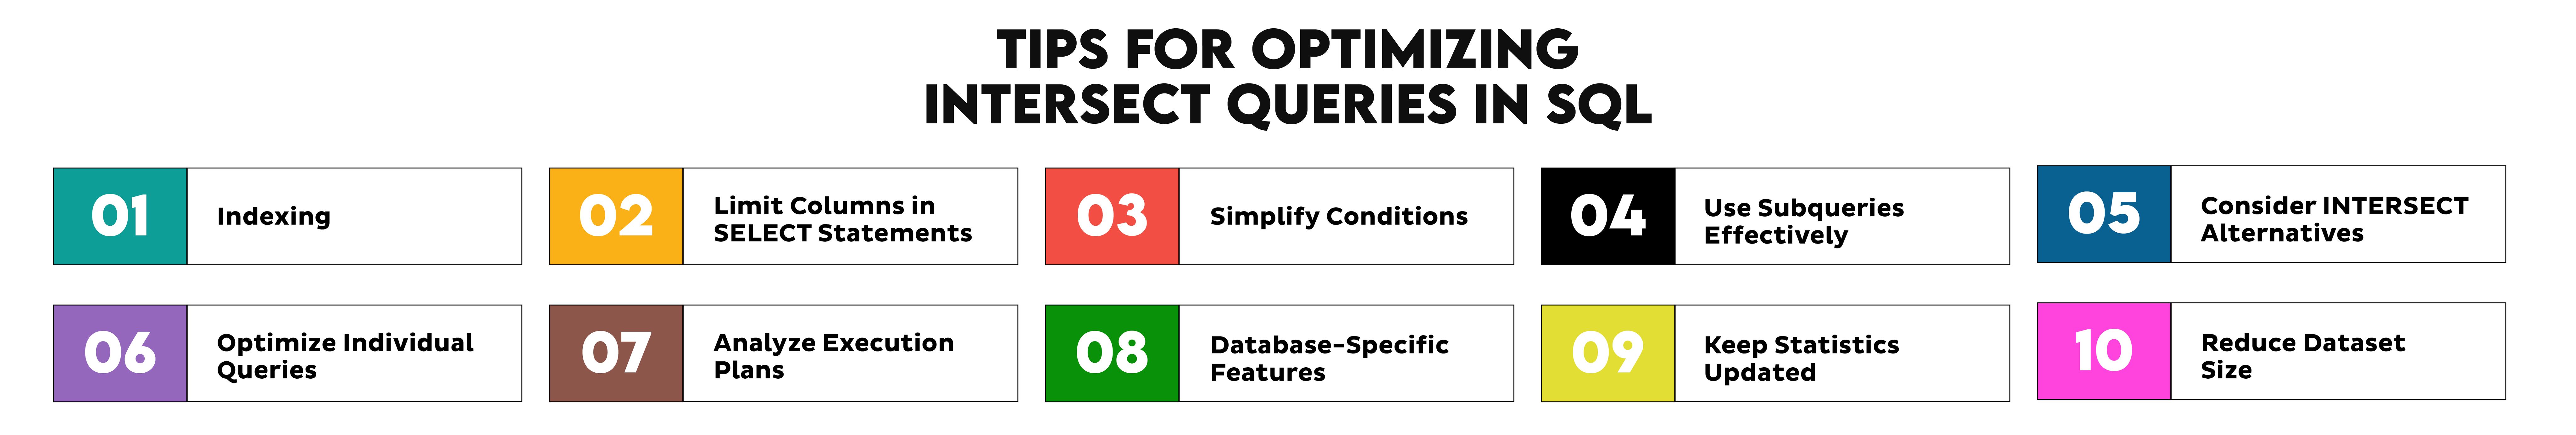 Tips to optimize intersect queries in SQL